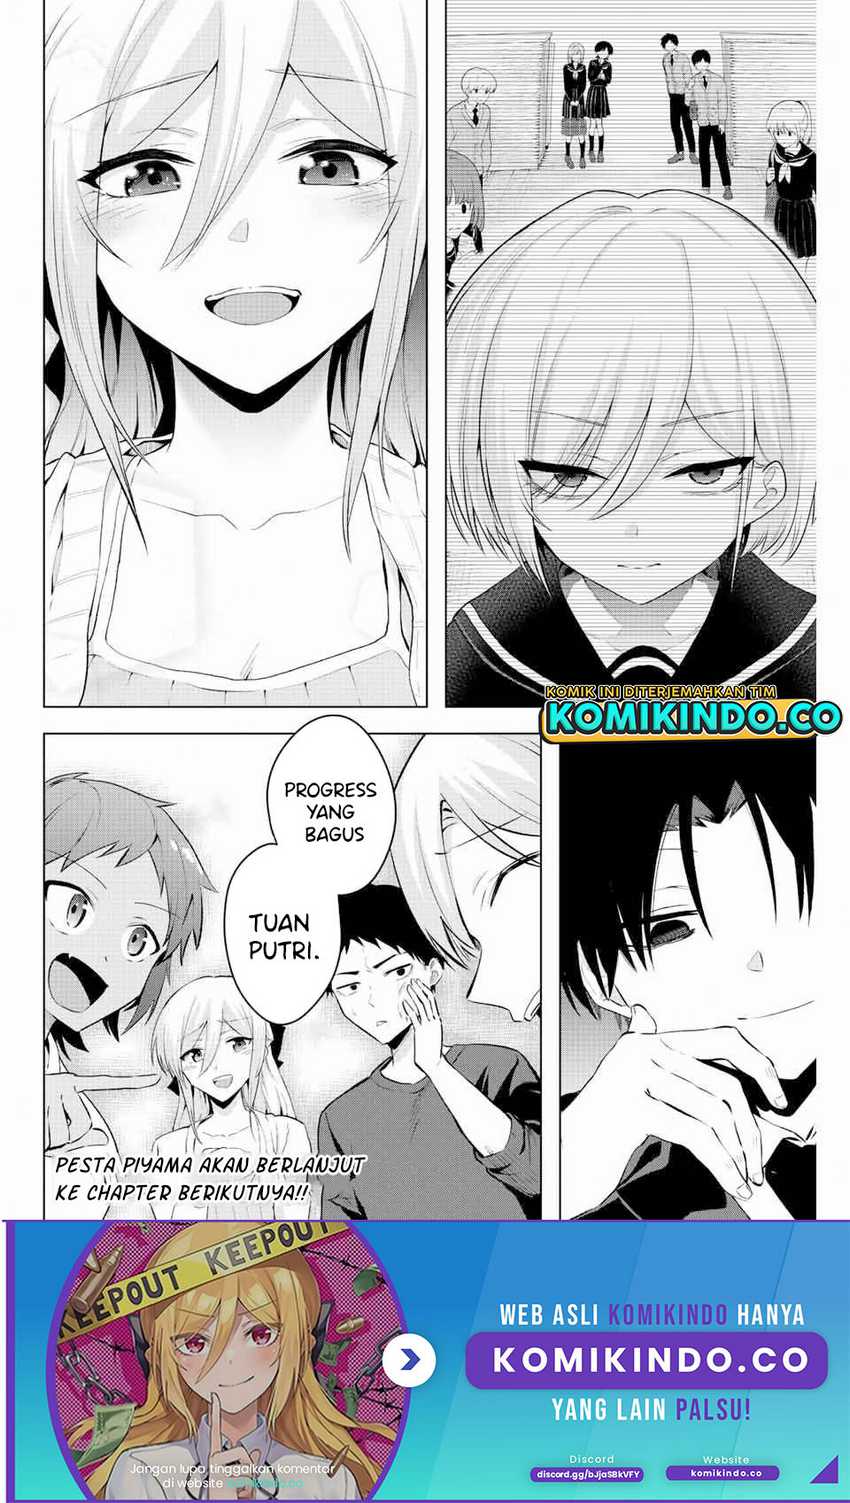 The Death Game Is All That Saotome-san Has Left Chapter 7